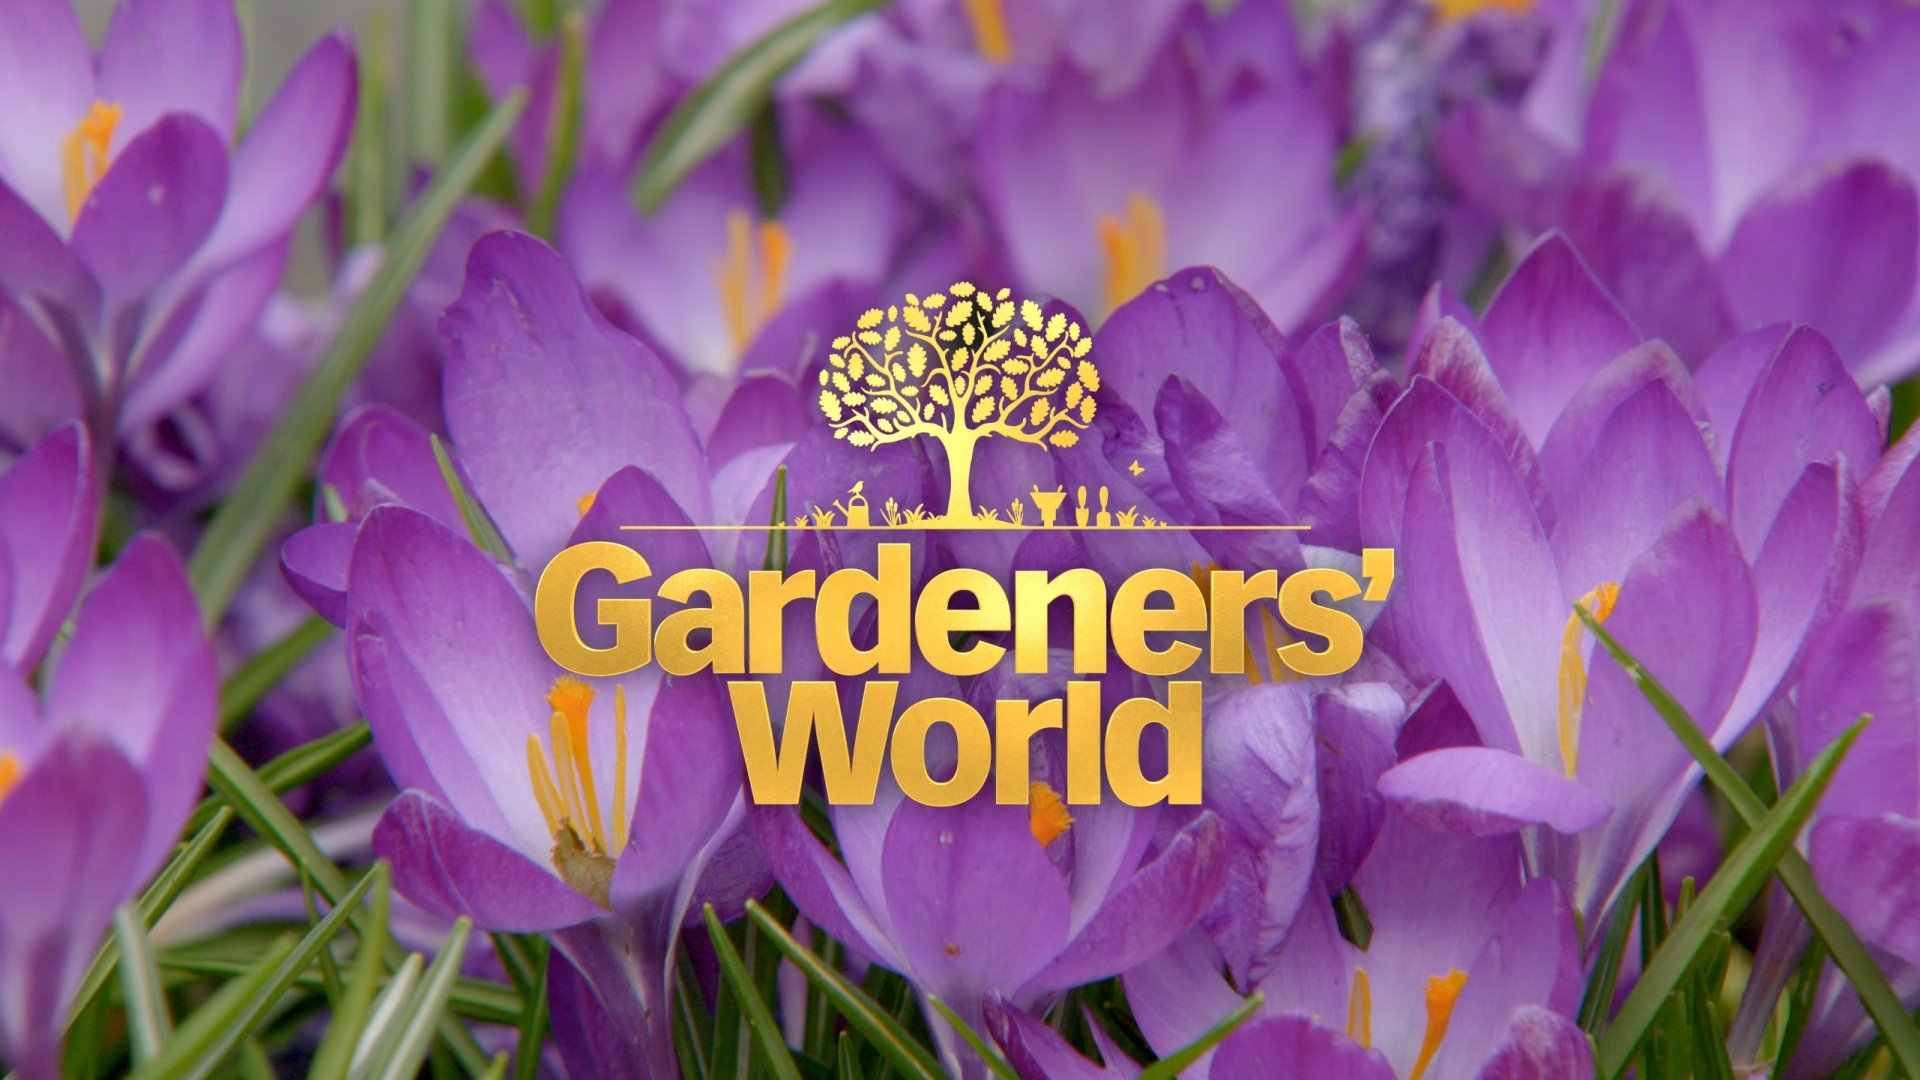 BBC Gardeners World wait is nearly over folks! Spring is here and we're raring to go. See you at 8.30pm on the dot